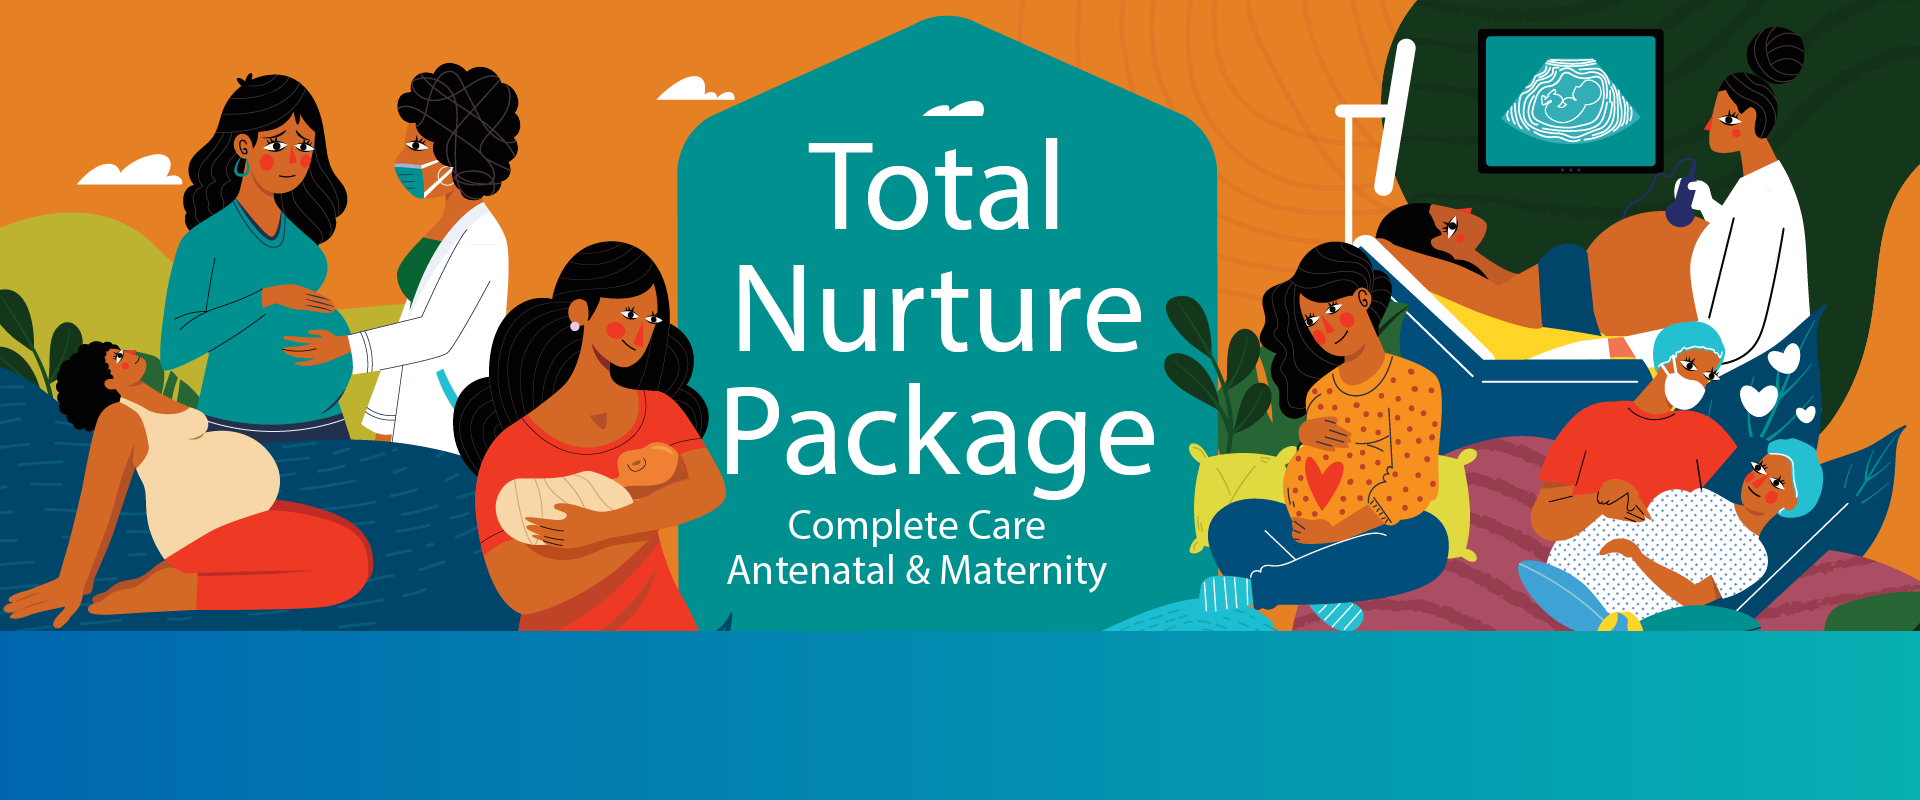 Complete Antenatal and Newborn Care at Manipal Hospitals, Pune